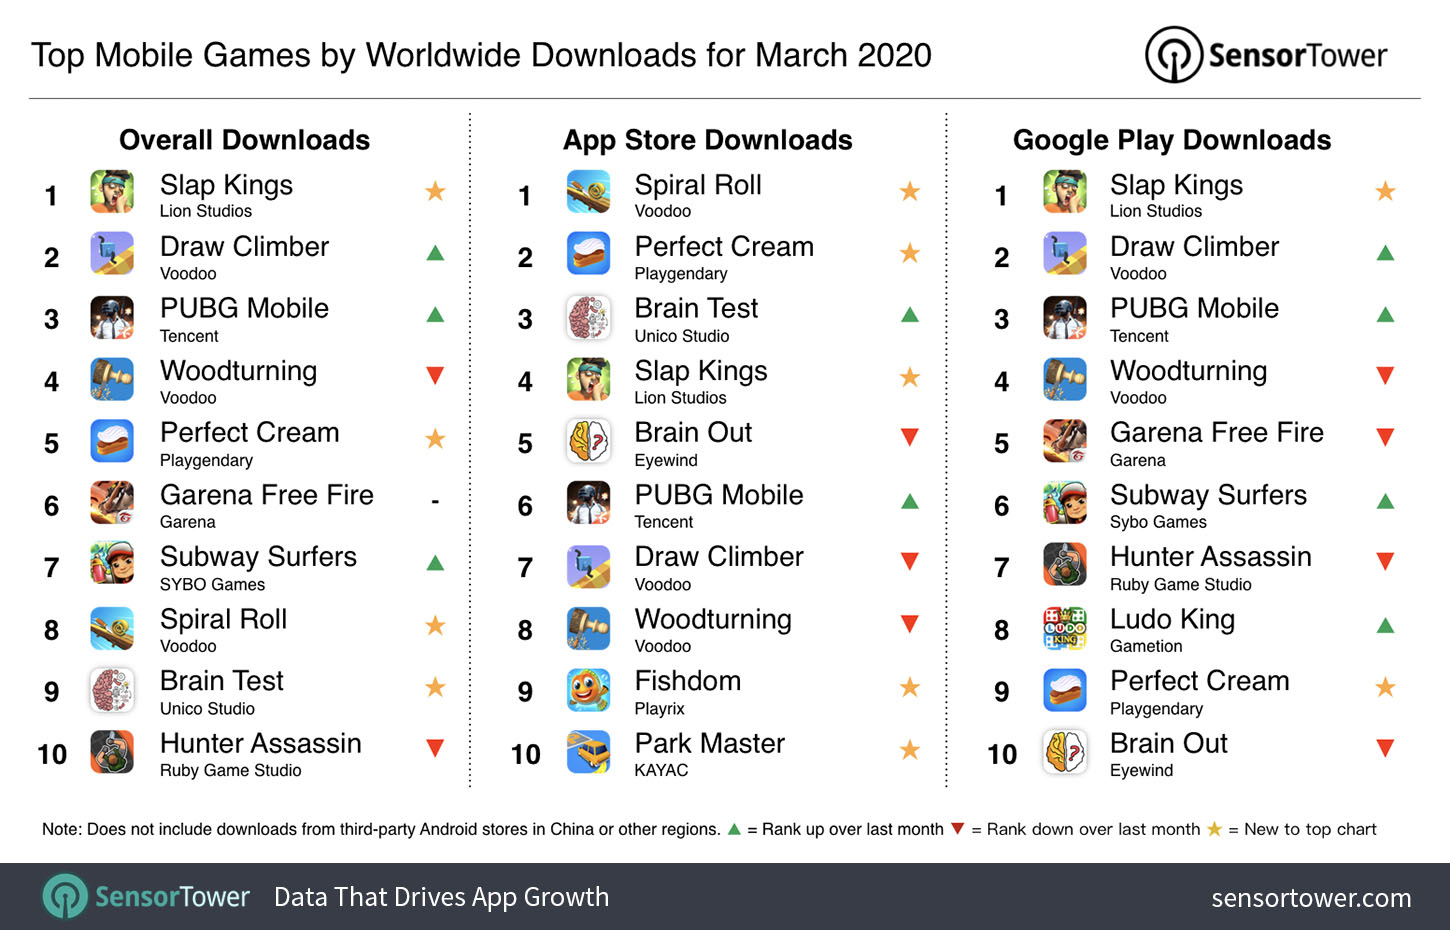 Top Mobile Games Worldwide for March 2020 by Downloads